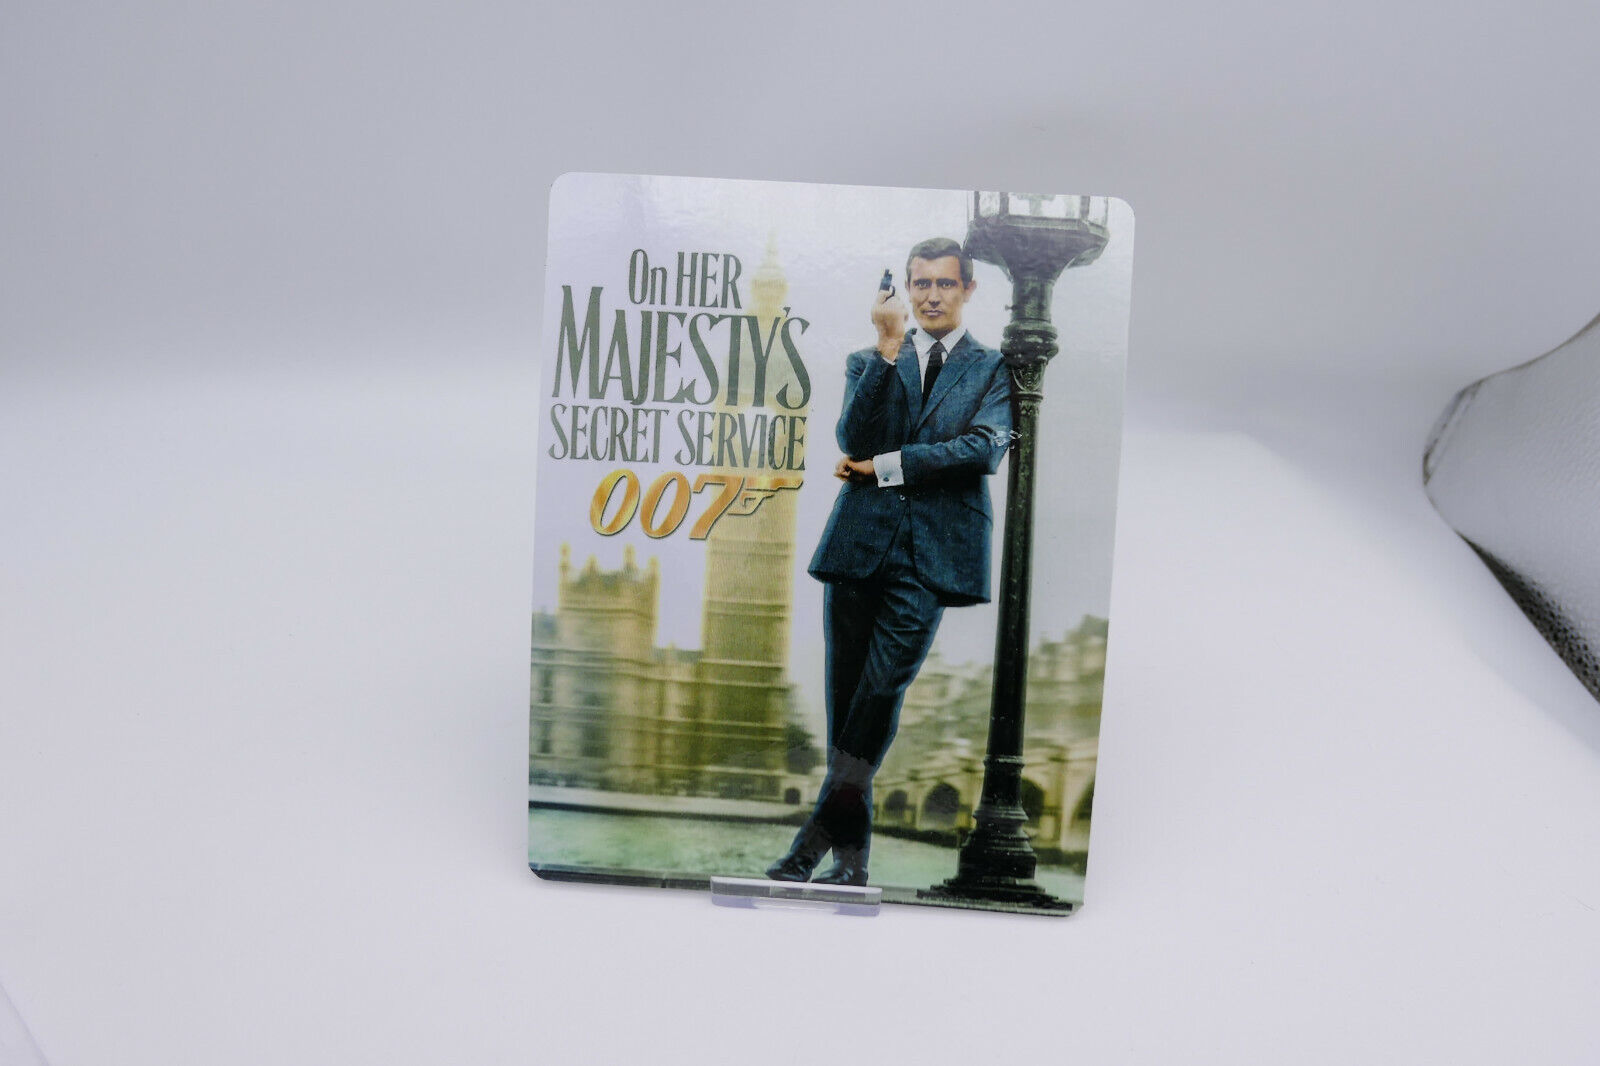 ON HER MAJESTY'S SECRET SERVICE - GLOSSY Steelbook Magnet Cover